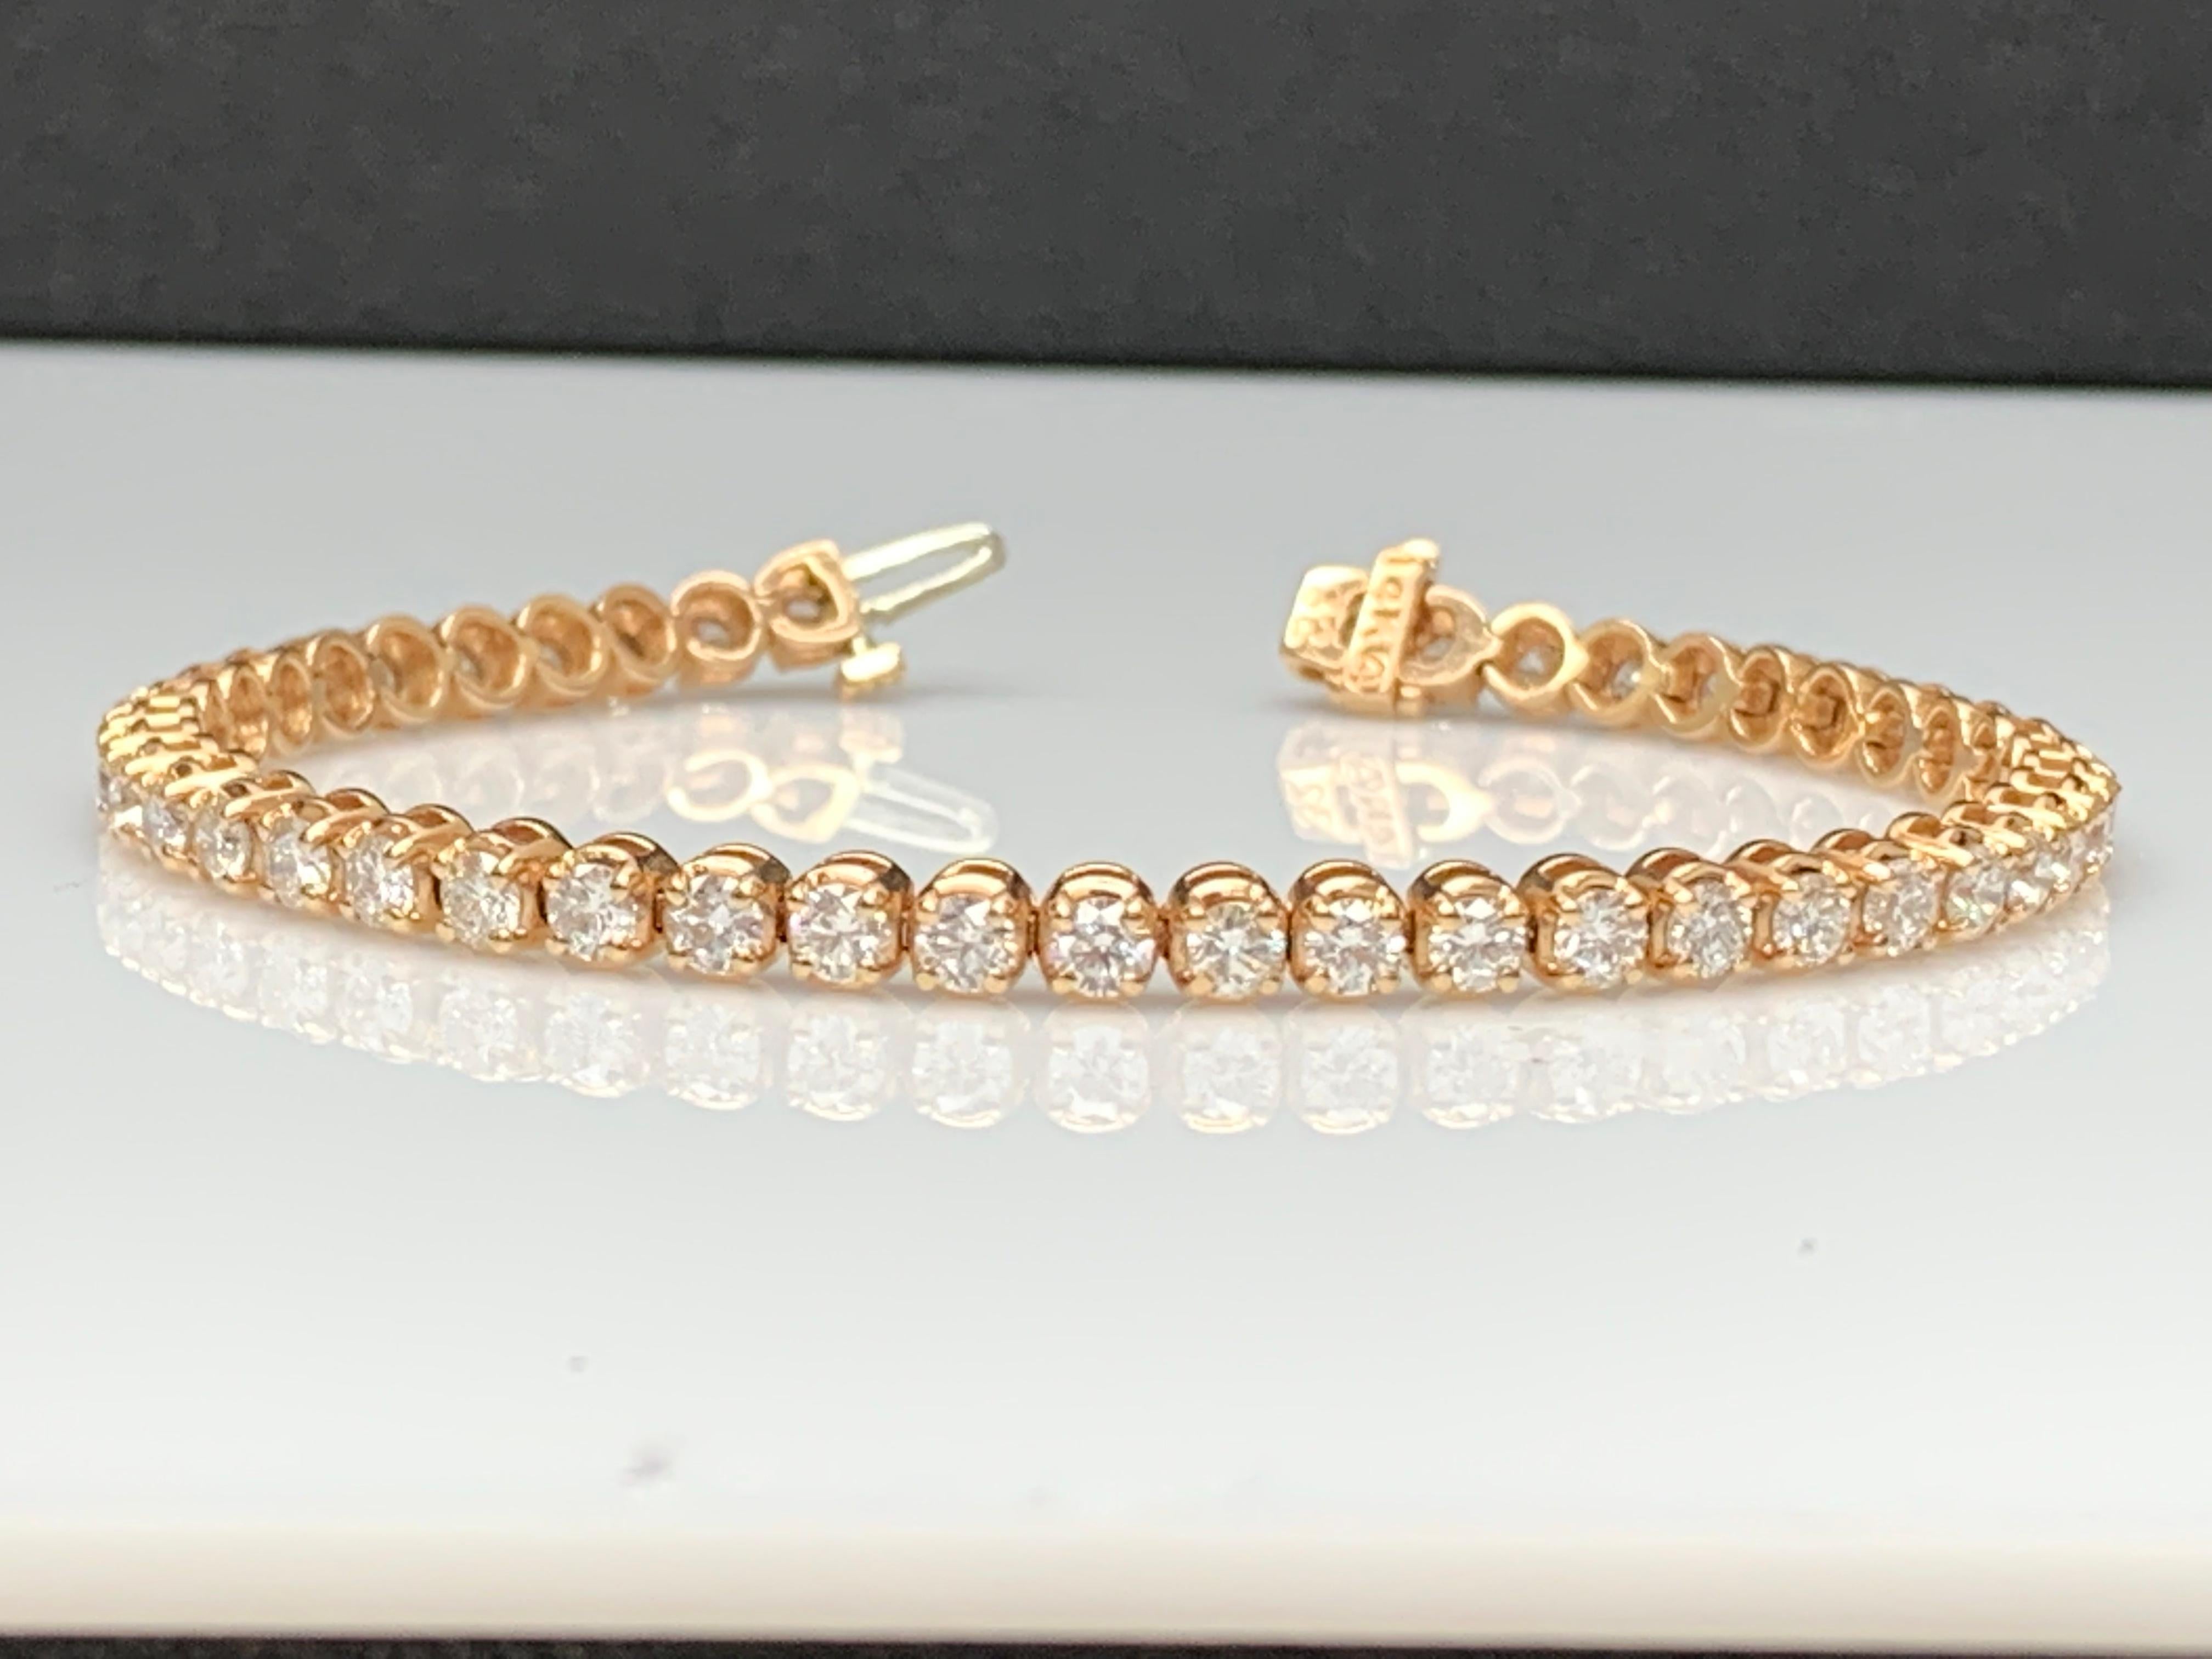 A classic tennis bracelet style showcasing a row of round brilliant diamonds, set in a polished 18k rose gold mounting. 26 Diamonds weigh 5.03 carats total and are approximately GH color, SI1 clarity.

Style available in different price ranges.